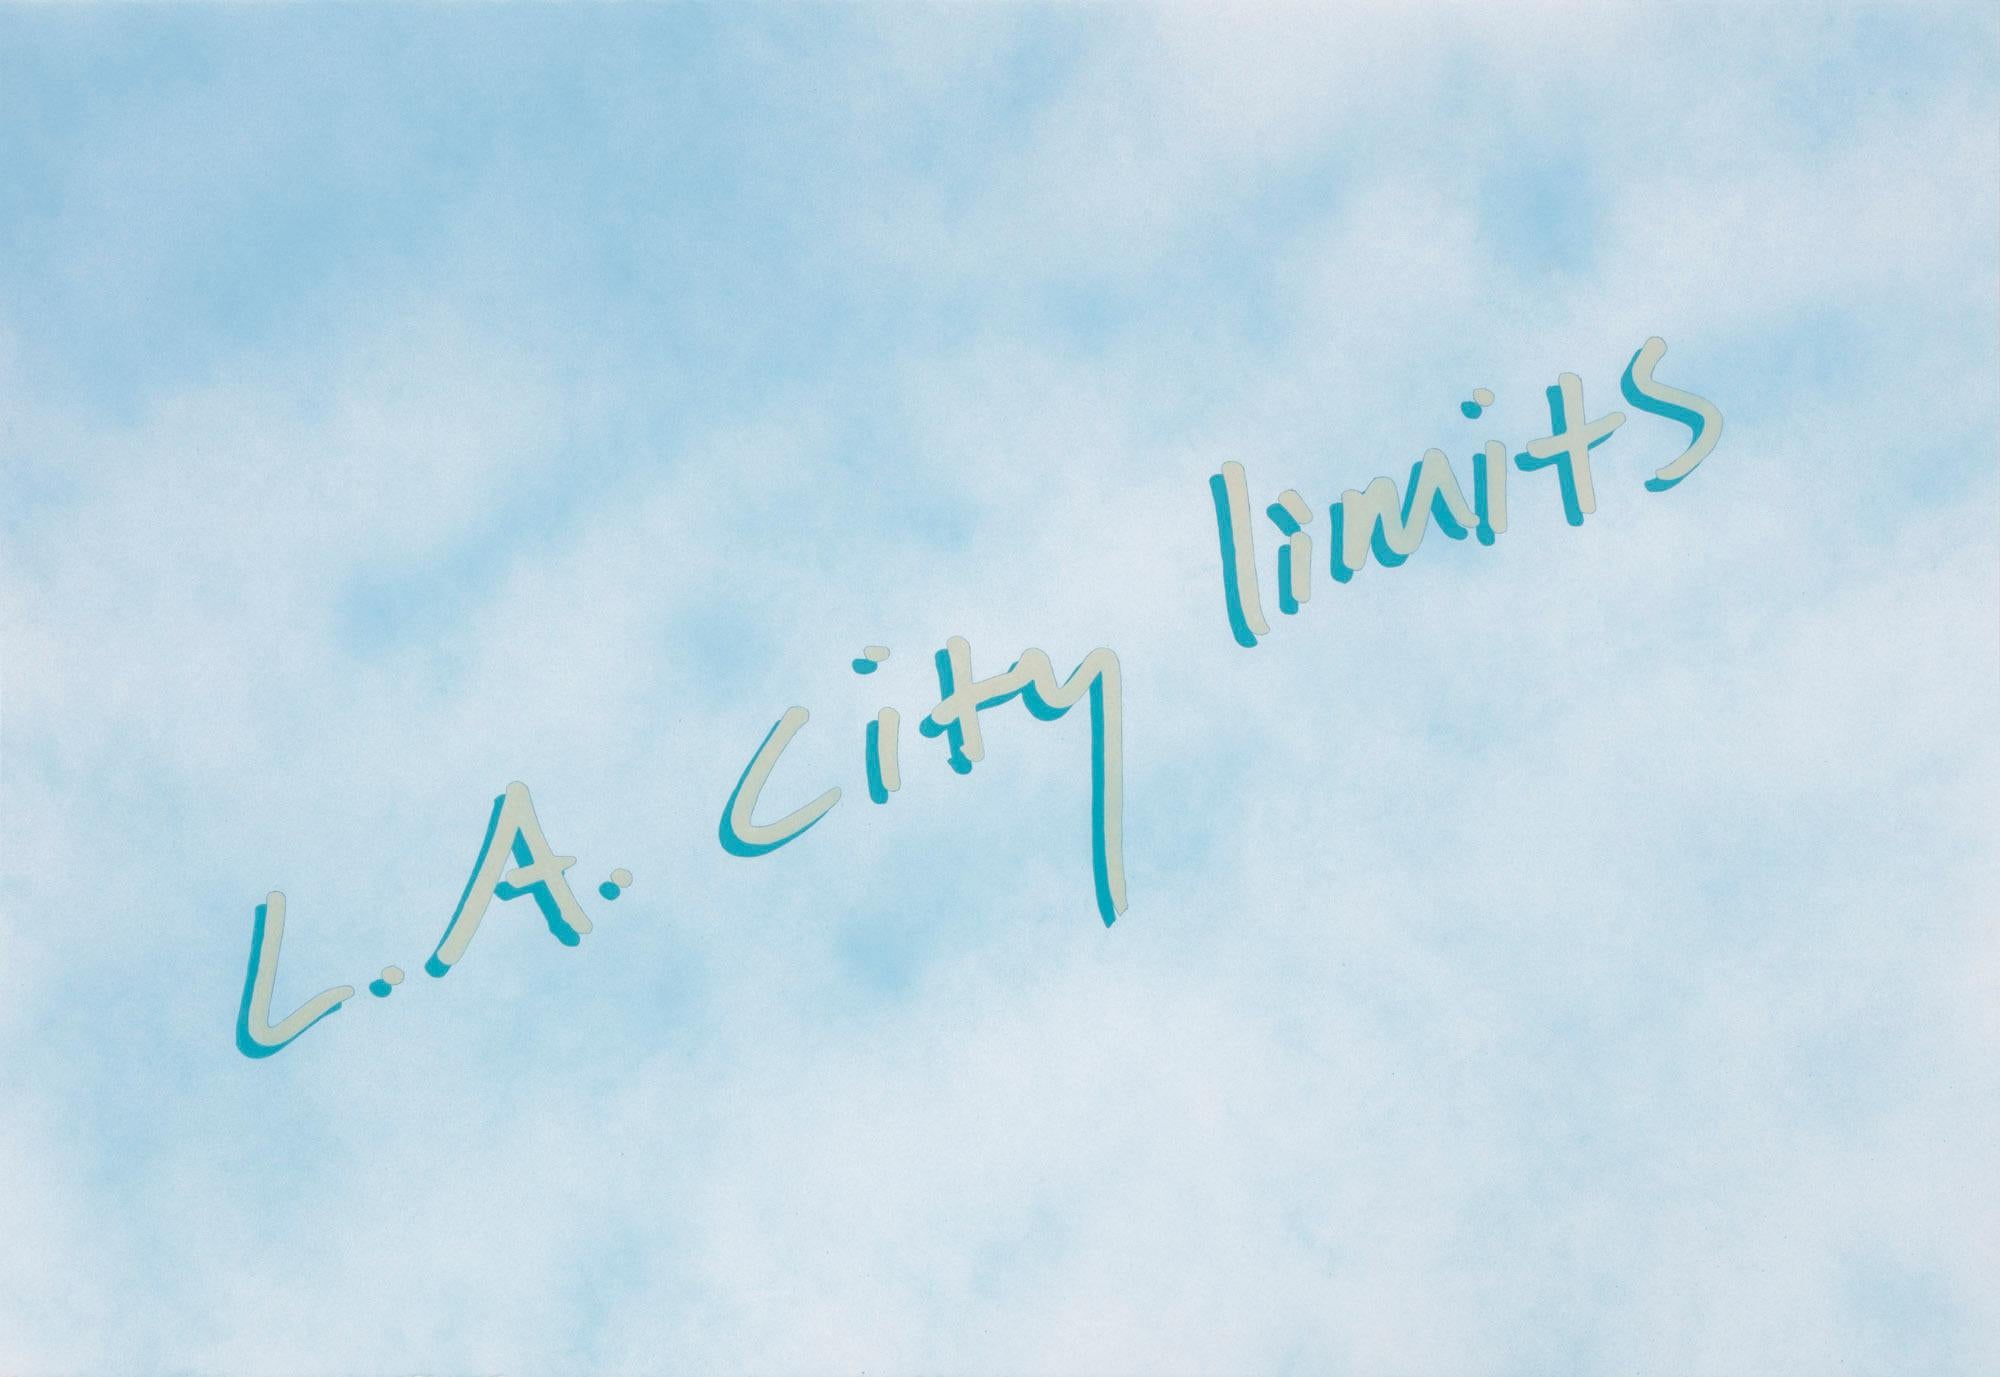 Untitled (L.A. city limits), 2017 is a unique contemporary textual painting on paper. The artist first creates a unique background atmosphere with matte spray paint and then meticulously hand-paints text in his material of choice, nail